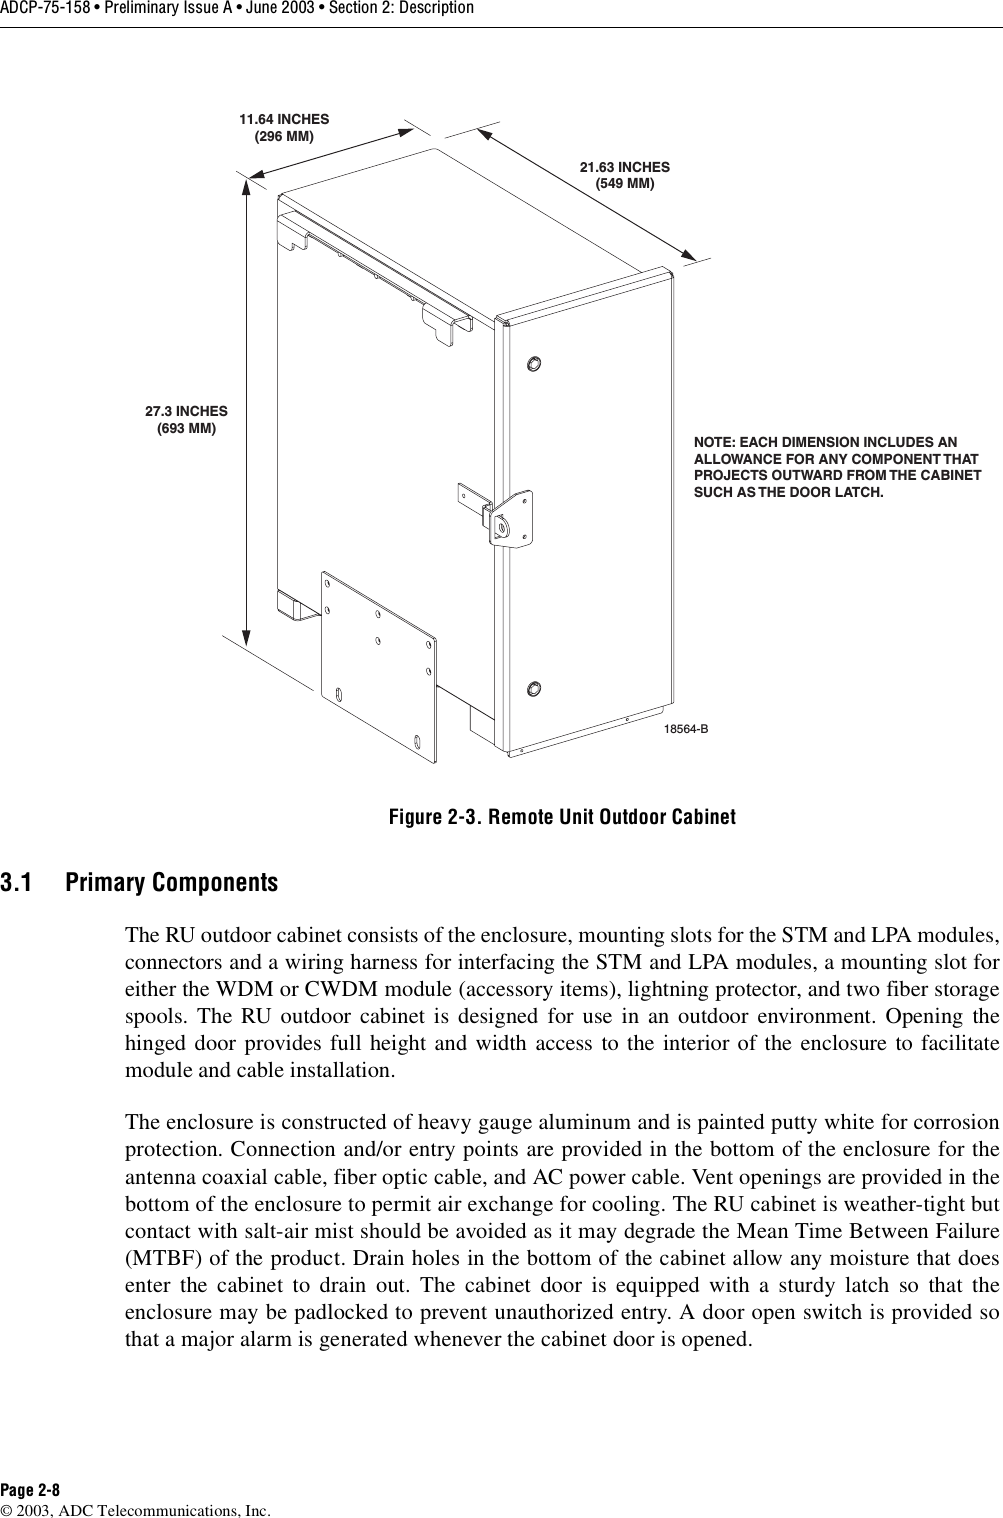 ADCP-75-158 • Preliminary Issue A • June 2003 • Section 2: DescriptionPage 2-8© 2003, ADC Telecommunications, Inc.Figure 2-3. Remote Unit Outdoor Cabinet3.1 Primary ComponentsThe RU outdoor cabinet consists of the enclosure, mounting slots for the STM and LPA modules,connectors and a wiring harness for interfacing the STM and LPA modules, a mounting slot foreither the WDM or CWDM module (accessory items), lightning protector, and two fiber storagespools. The RU outdoor cabinet is designed for use in an outdoor environment. Opening thehinged door provides full height and width access to the interior of the enclosure to facilitatemodule and cable installation. The enclosure is constructed of heavy gauge aluminum and is painted putty white for corrosionprotection. Connection and/or entry points are provided in the bottom of the enclosure for theantenna coaxial cable, fiber optic cable, and AC power cable. Vent openings are provided in thebottom of the enclosure to permit air exchange for cooling. The RU cabinet is weather-tight butcontact with salt-air mist should be avoided as it may degrade the Mean Time Between Failure(MTBF) of the product. Drain holes in the bottom of the cabinet allow any moisture that doesenter the cabinet to drain out. The cabinet door is equipped with a sturdy latch so that theenclosure may be padlocked to prevent unauthorized entry. A door open switch is provided sothat a major alarm is generated whenever the cabinet door is opened. NOTE: EACH DIMENSION INCLUDES ANALLOWANCE FOR ANY COMPONENT THATPROJECTS OUTWARD FROM THE CABINETSUCH AS THE DOOR LATCH. 18564-B27.3 INCHES(693 MM)11.64 INCHES(296 MM)21.63 INCHES(549 MM)